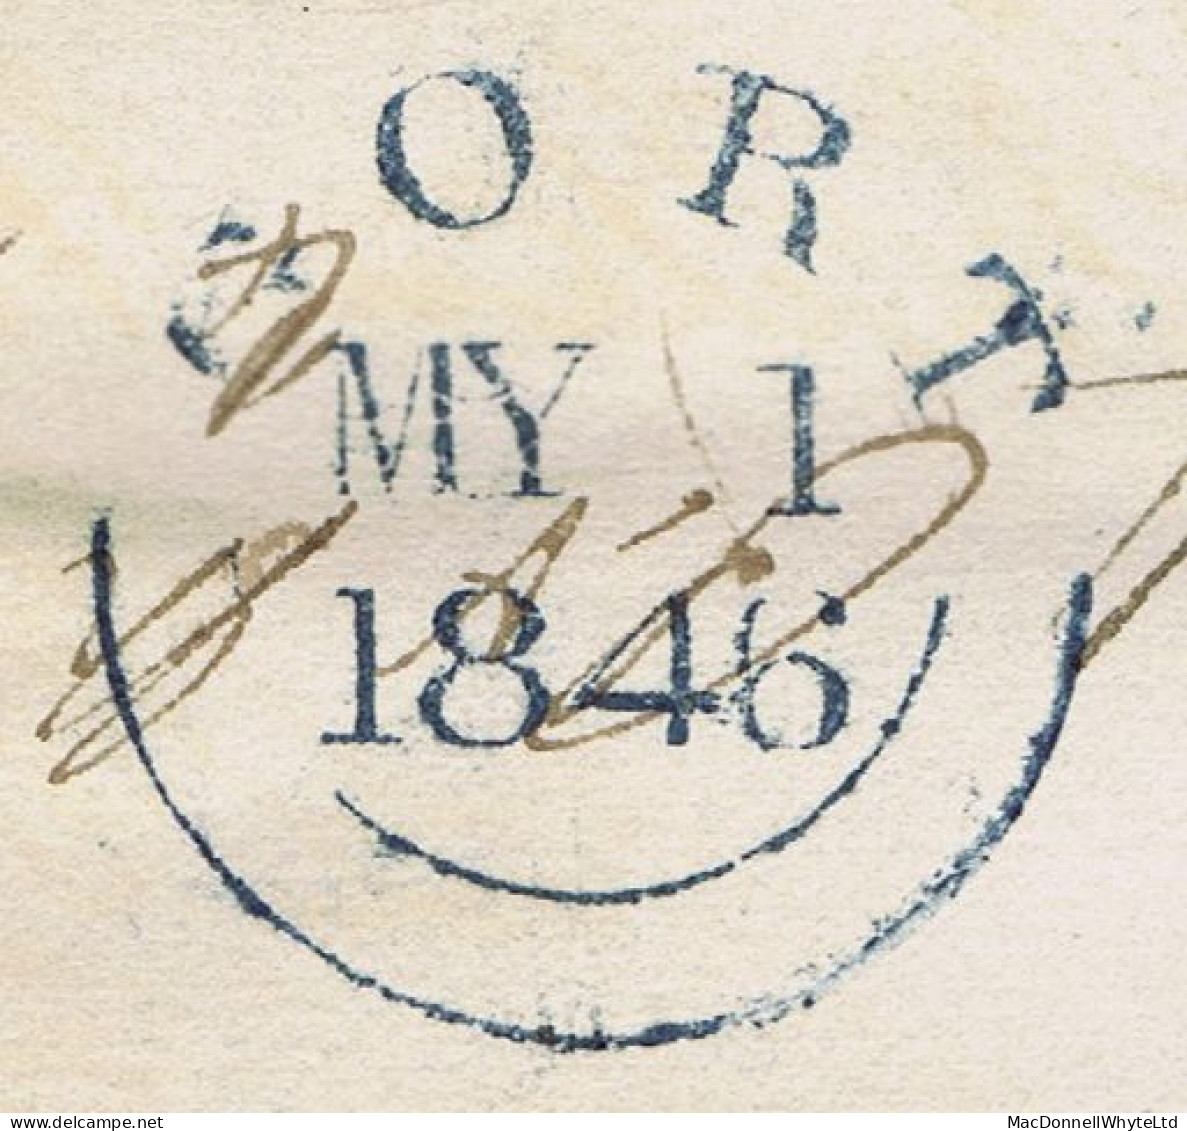 Ireland Galway Uniform Penny Post 1846 Cover To Military Dept London Boxed 2-line PAID AT GORT In Blue, GORT MY 1 1846 - Prefilatelia